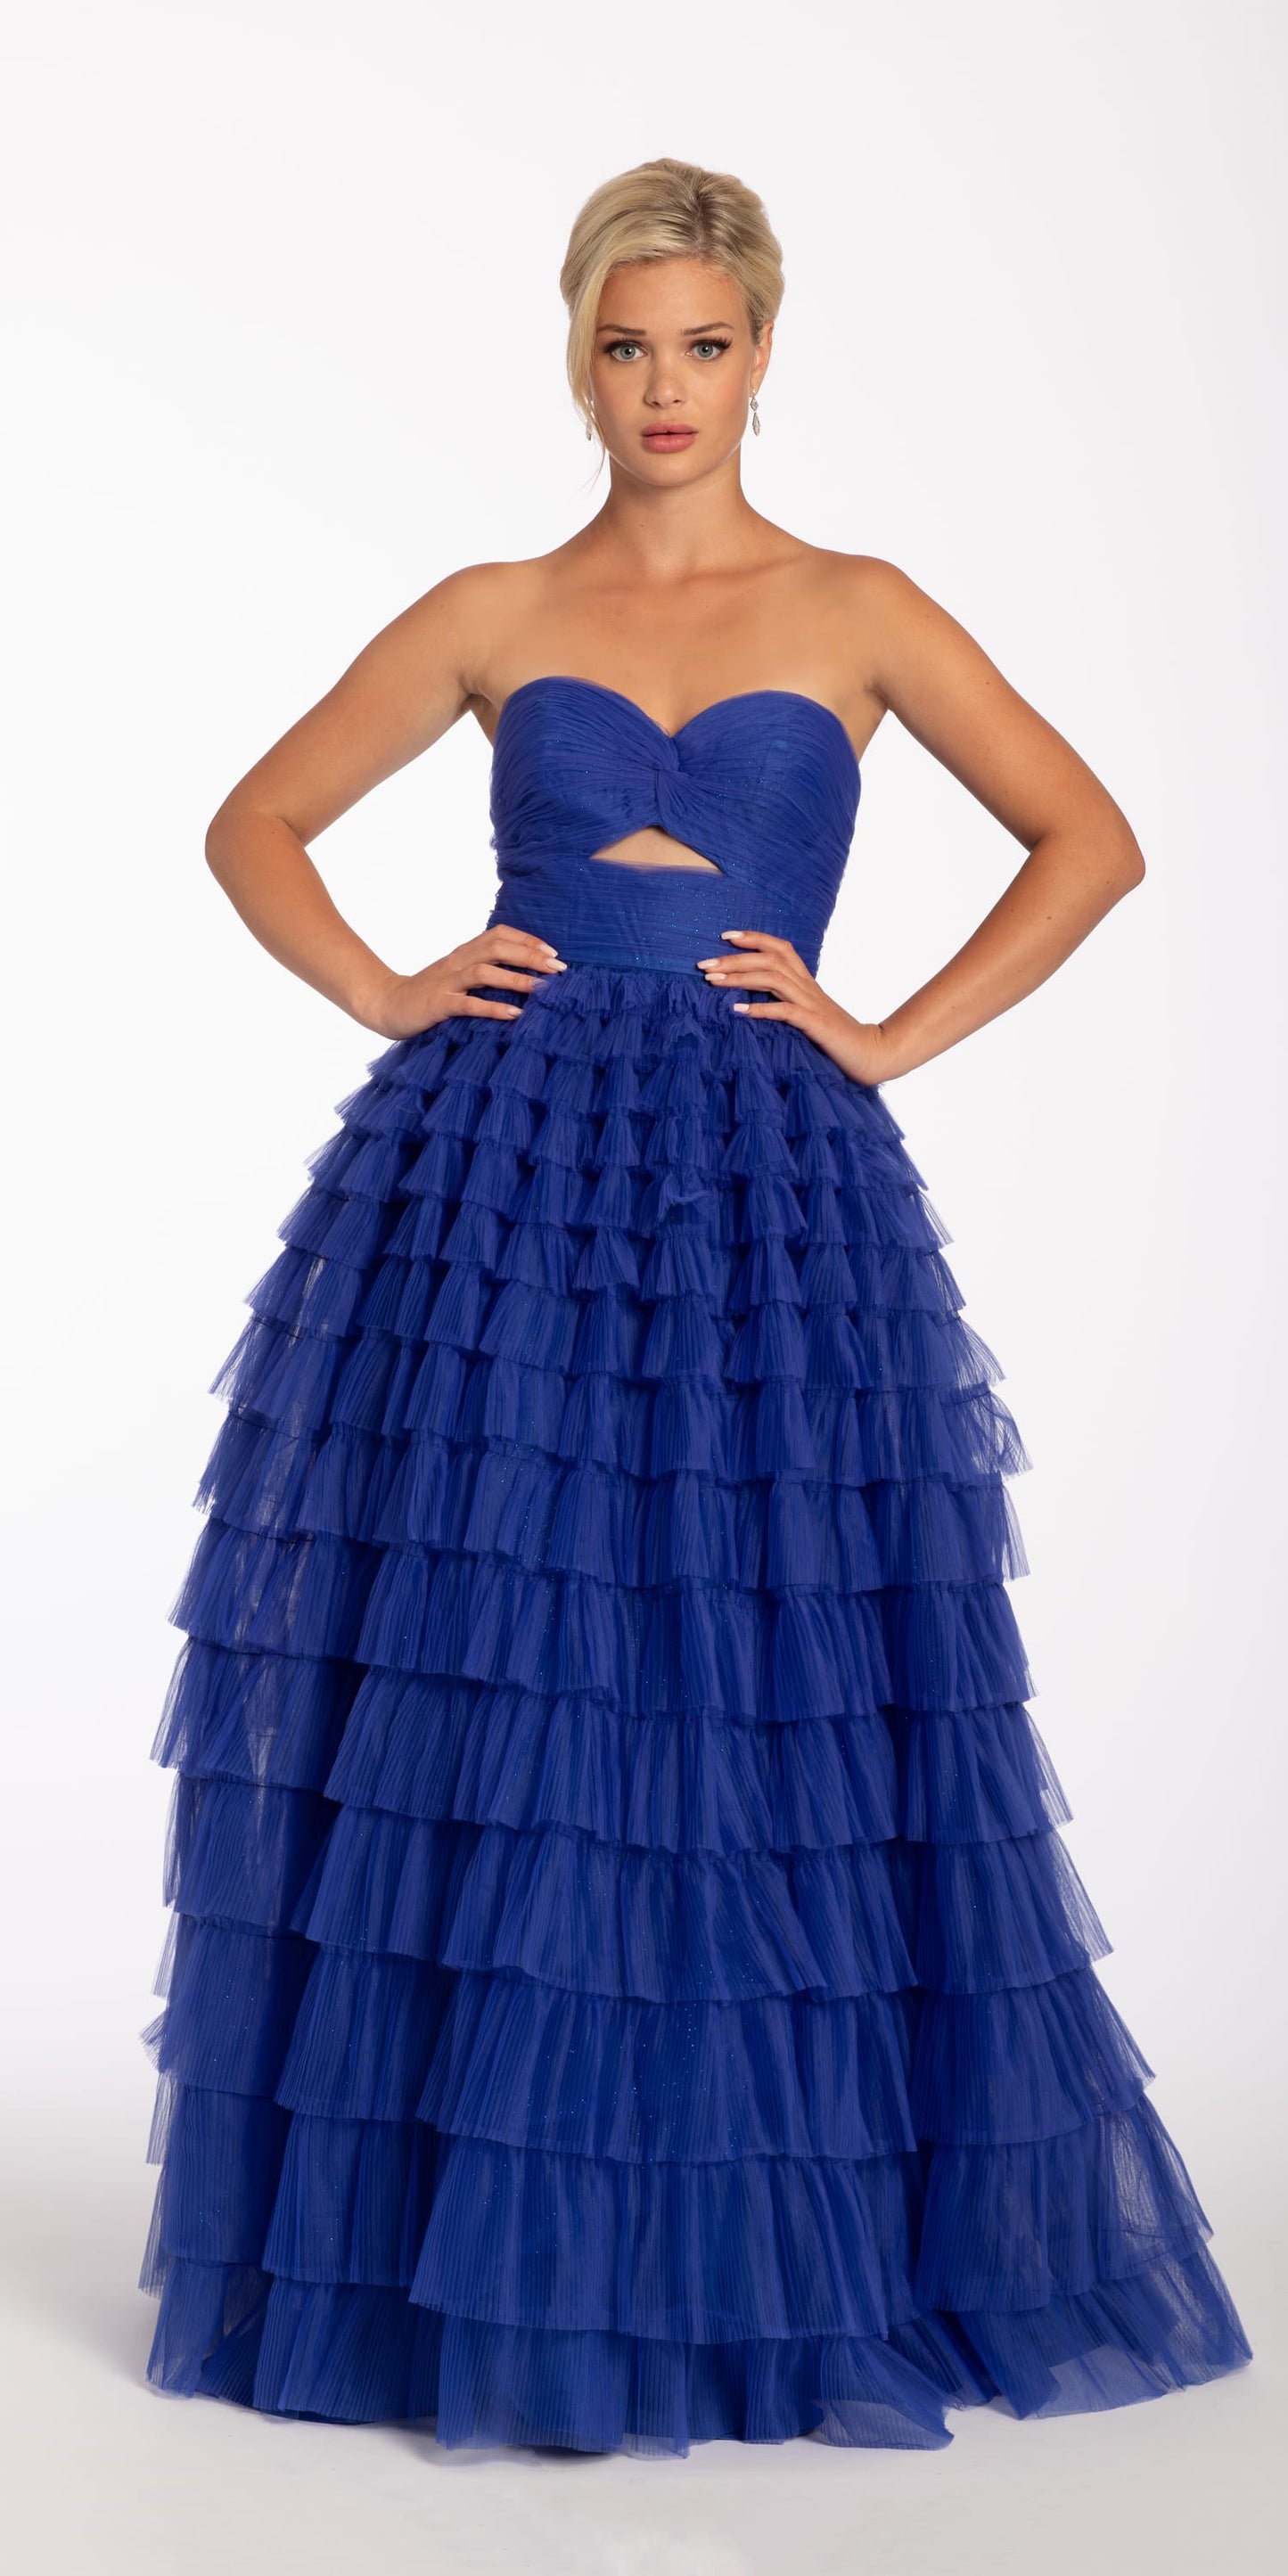 Camille La Vie Pleated Tulle Ballgown with Peek-A-Boo Bodice